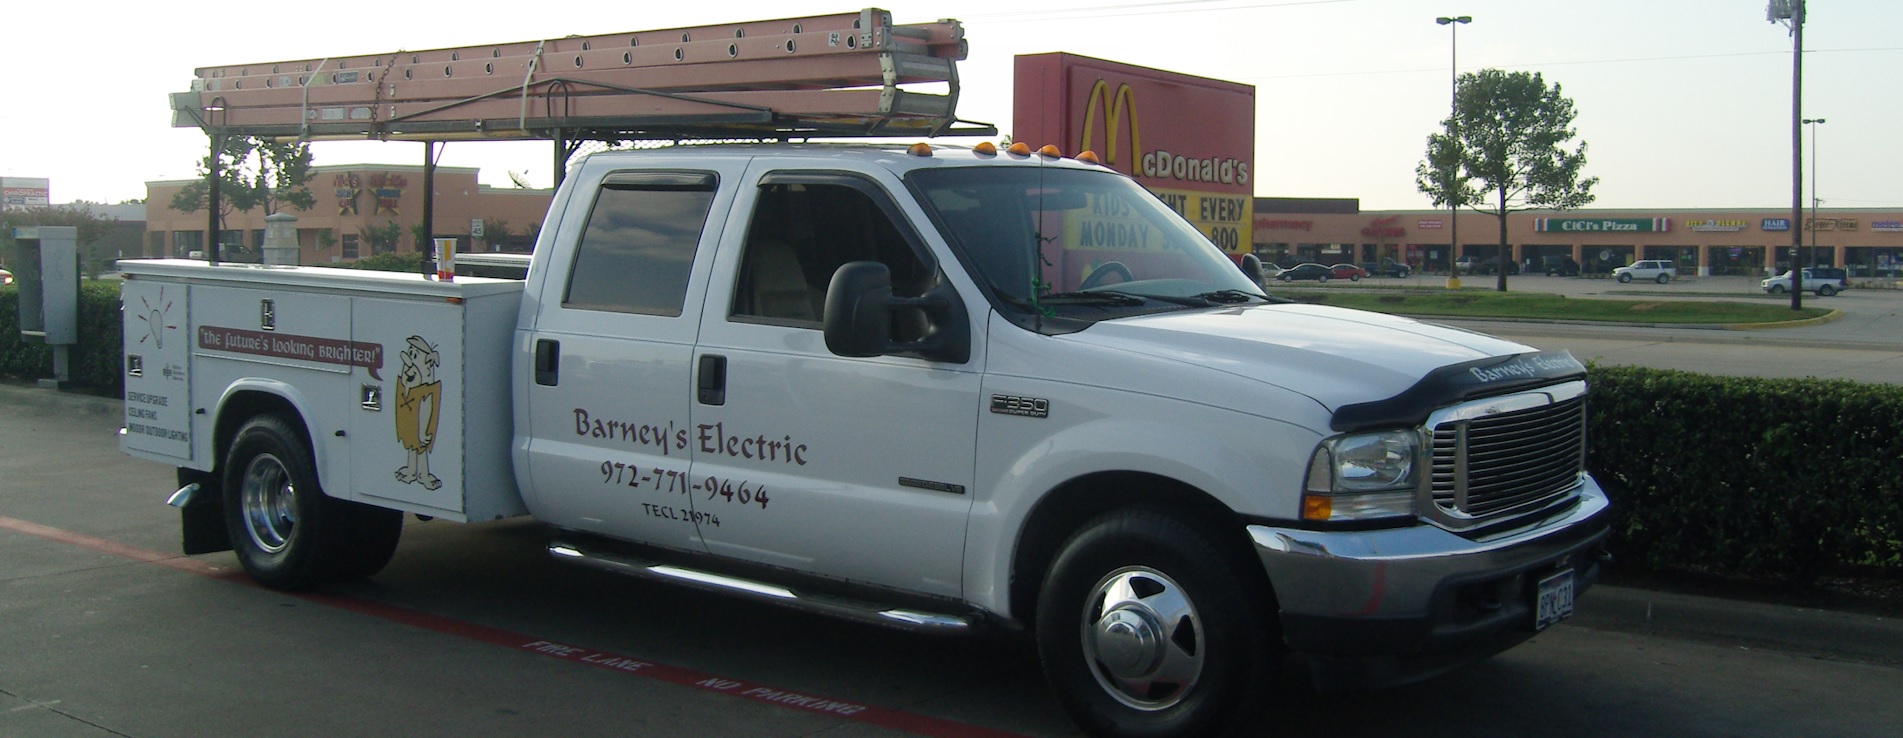 Barney's Electric Master Electrician Rockwall Texas - Electrical Services Residential Electrician Commercial Electrician Dallas Garland Mesquite Plano Richardson Rockwall Rowlett